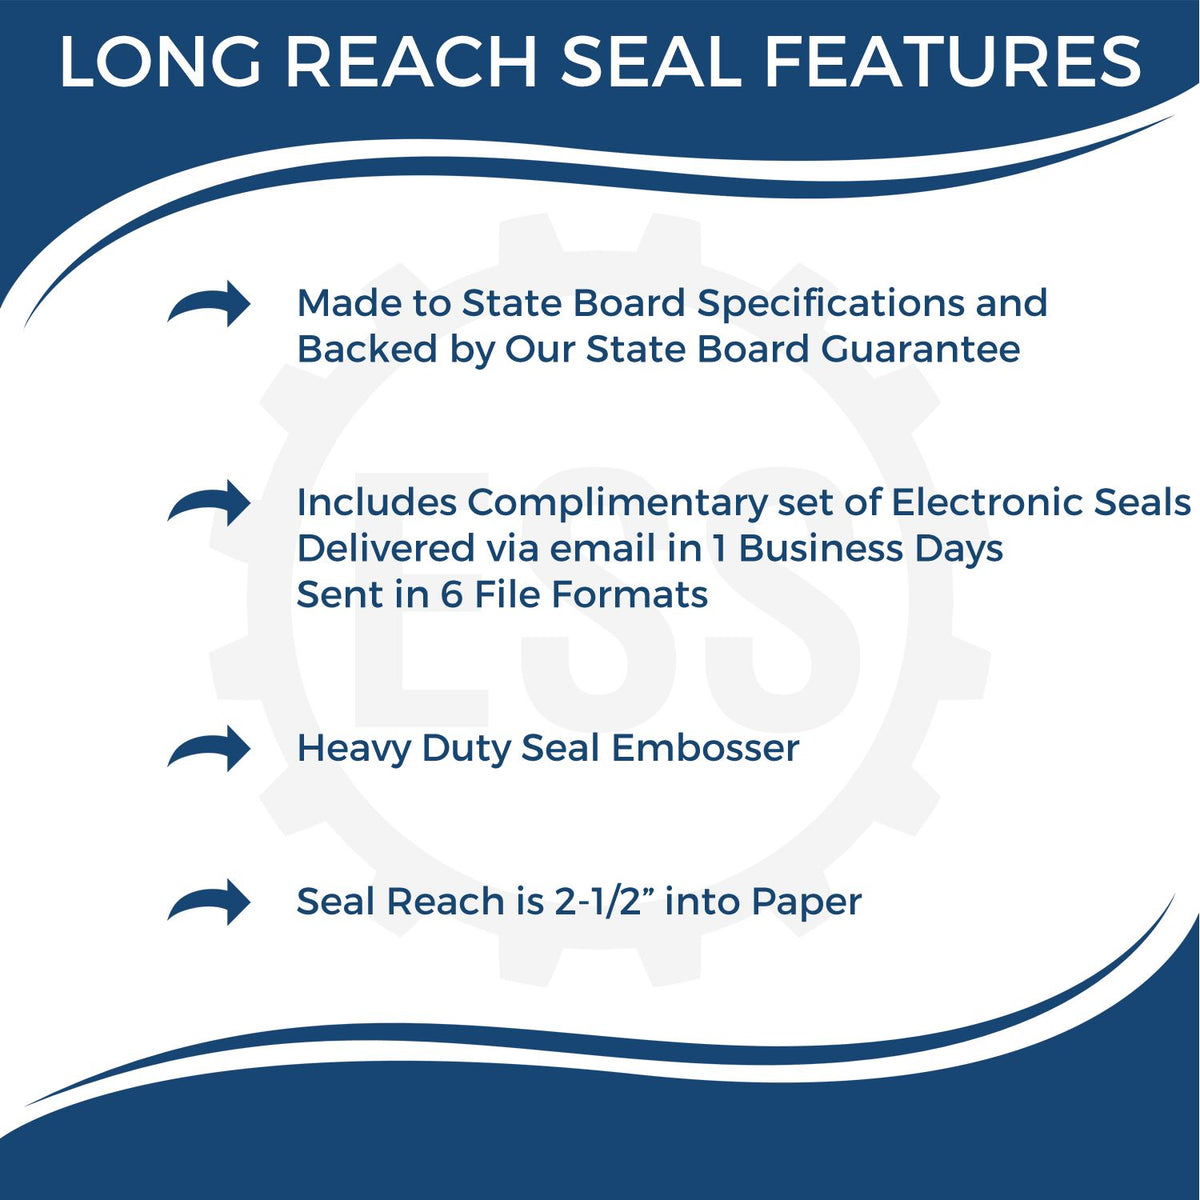 A picture of an infographic highlighting the selling points for the Long Reach Delaware Land Surveyor Seal